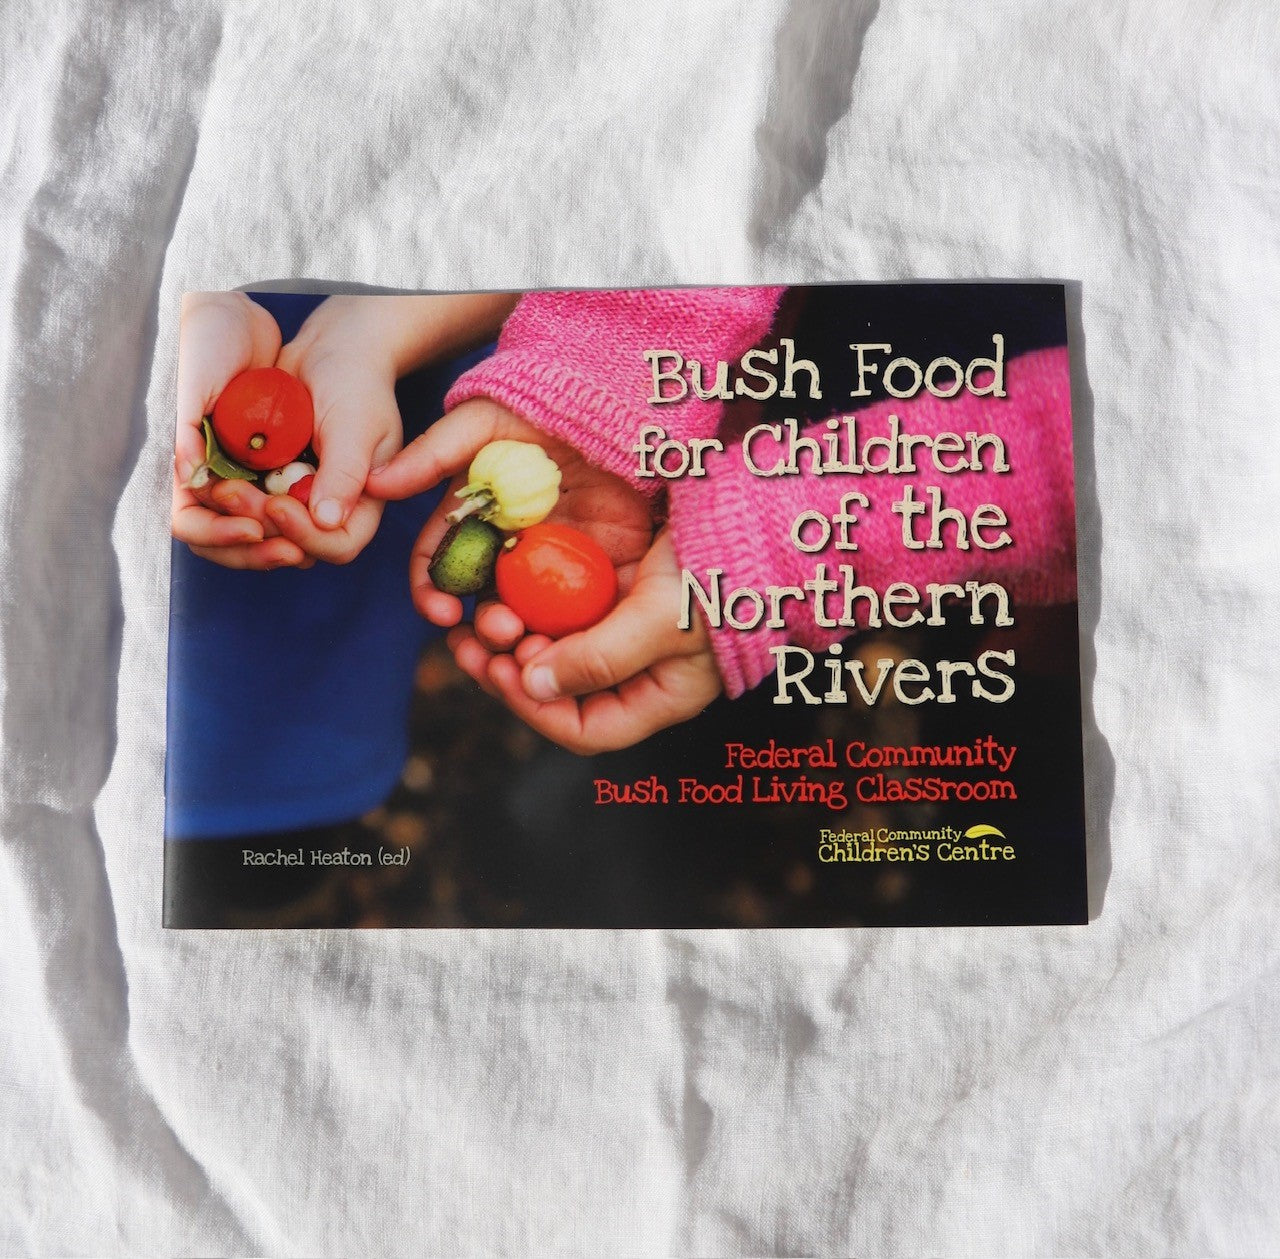 Bush Food for Children of the Northern Rivers